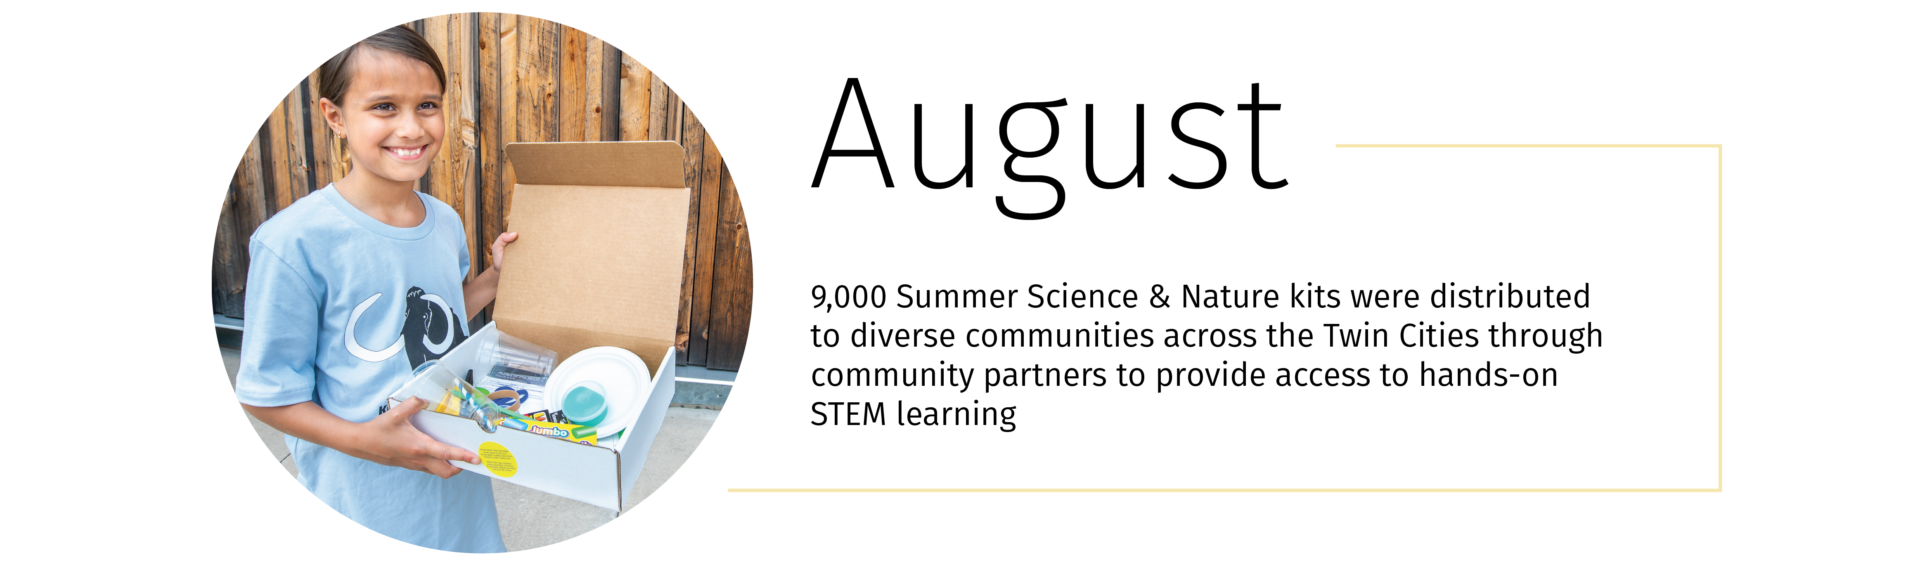 A child holding a box with things in it and the text, "9,000 Summer Science & Nature kits were distributed to diverse communities across the Twin Cities through community partners to provide access to hands-on STEM learning"